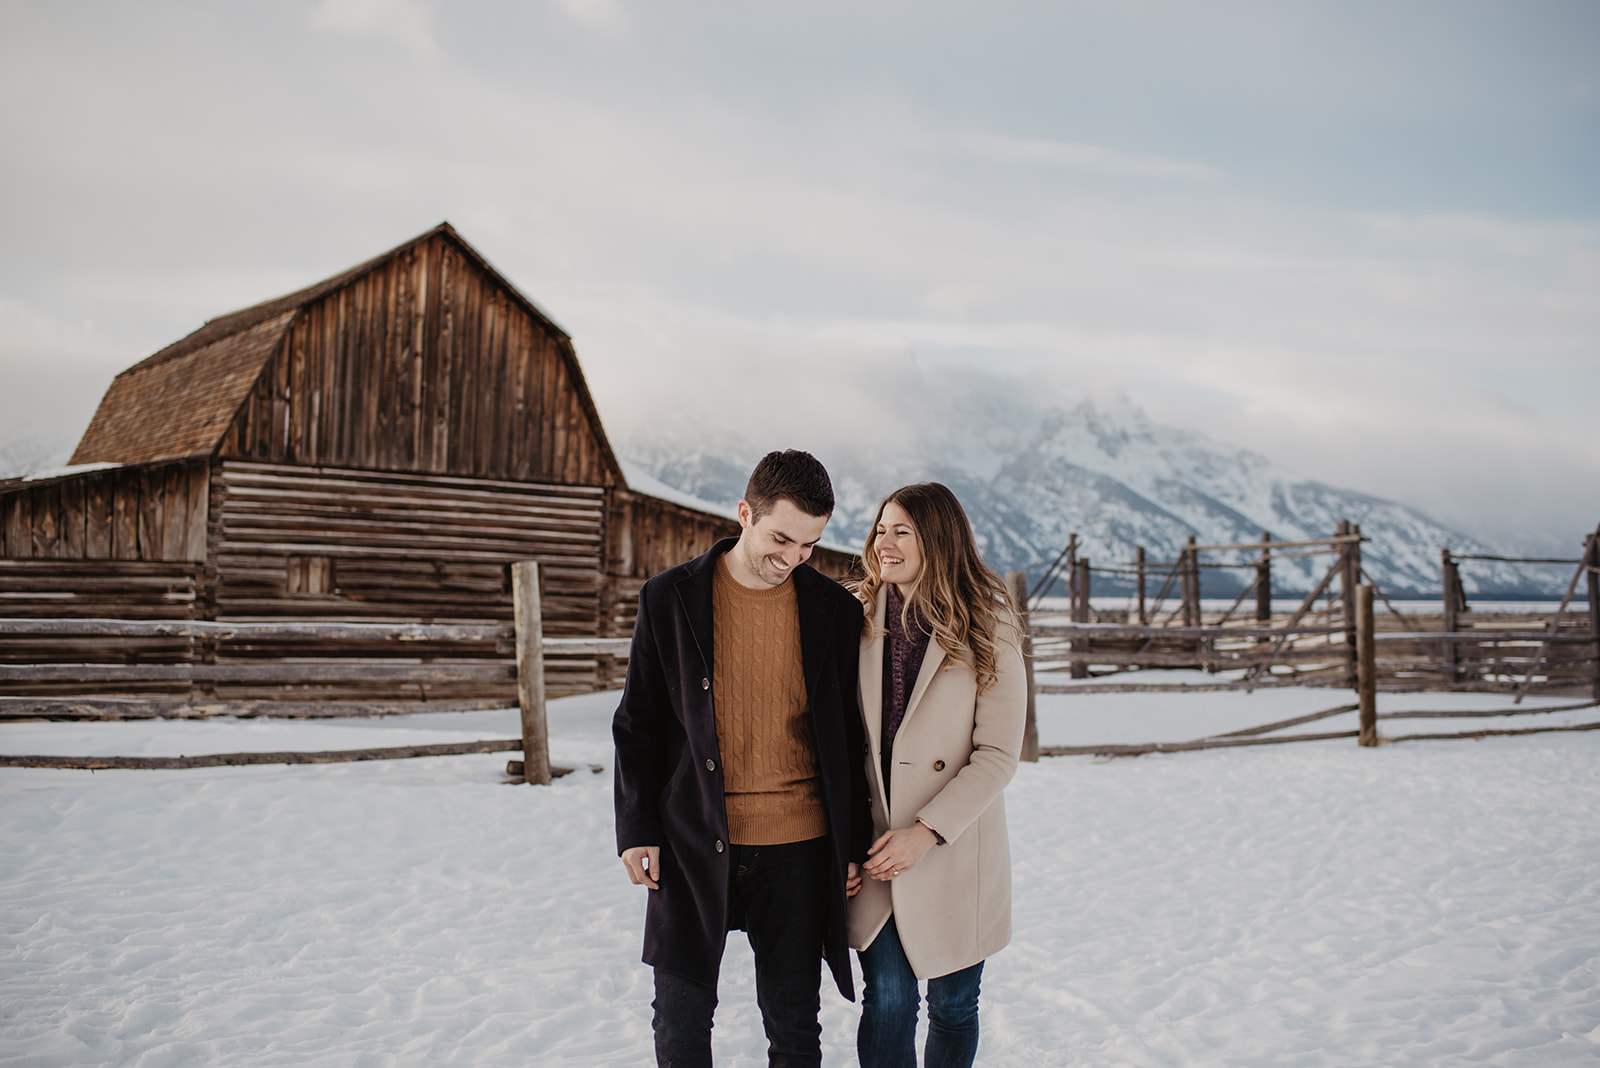 Jackson Hole winter engagement sessionwith couple walking in front of an old brown wooden bard in front of the Tetons while holding hands and dressed up